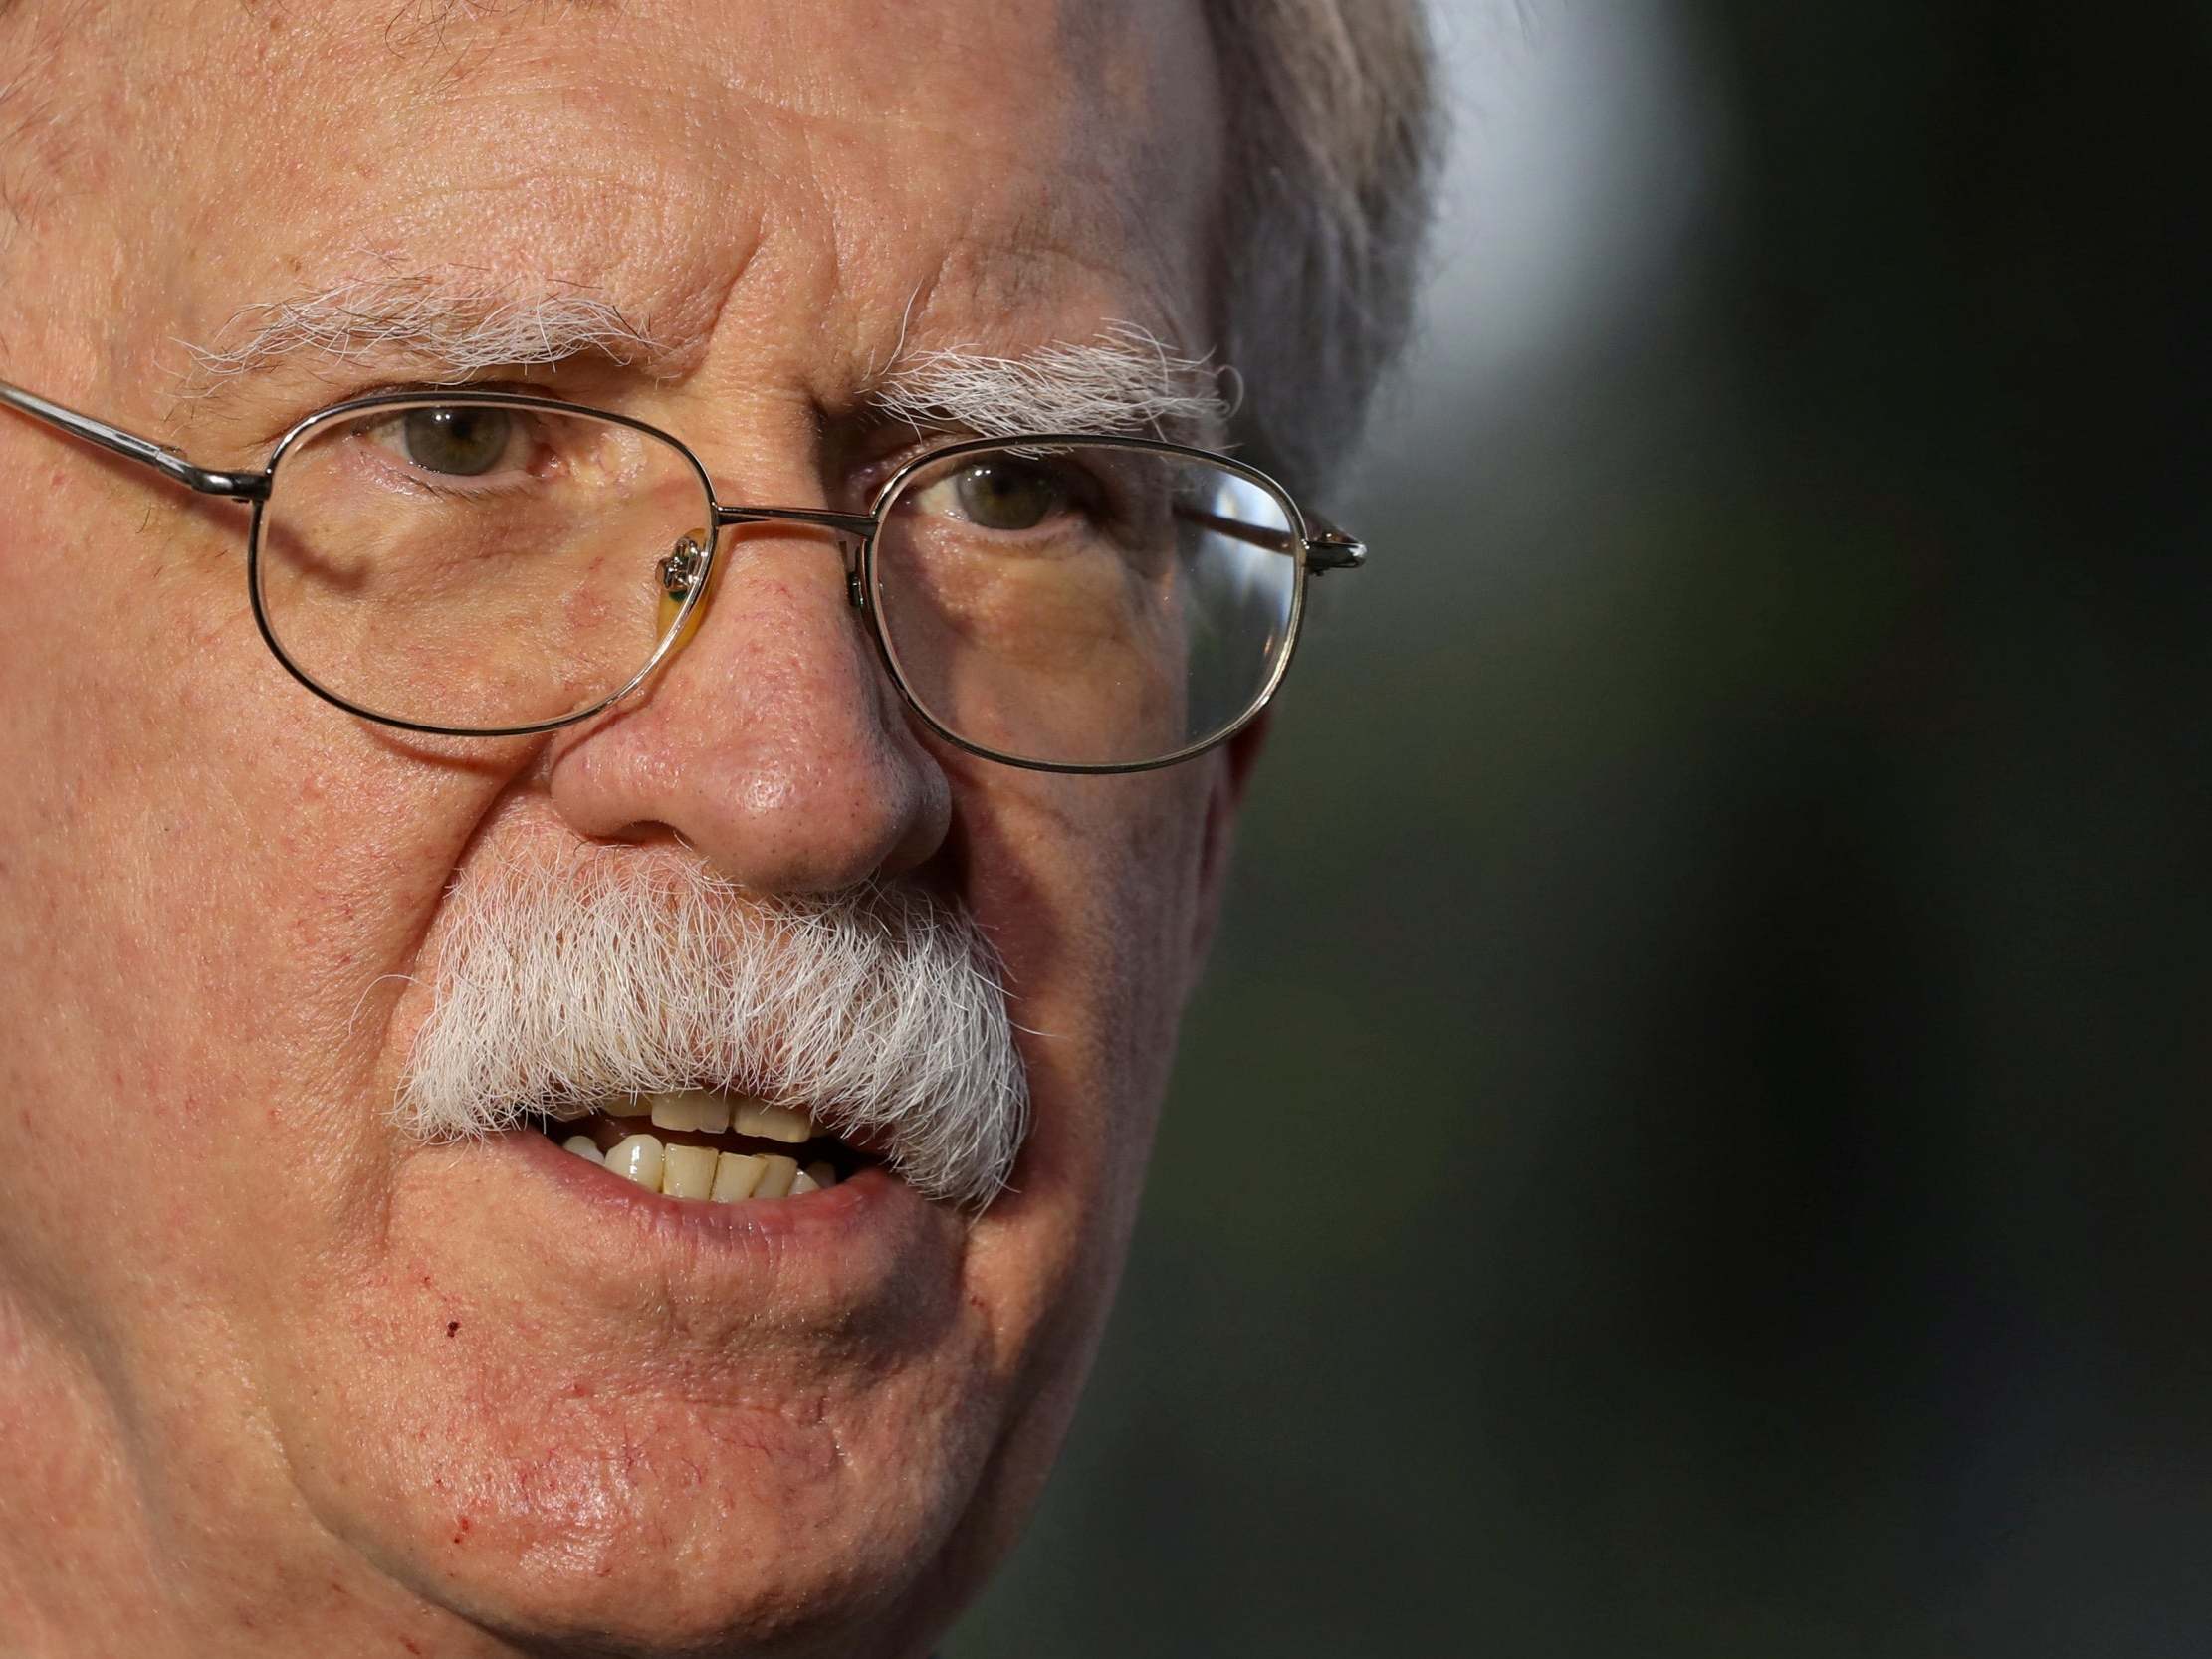 Mr Bolton claimed in Abu Dhabi, on his way to London, that it was ‘clear that Iran is behind’ the attacks on the tankers